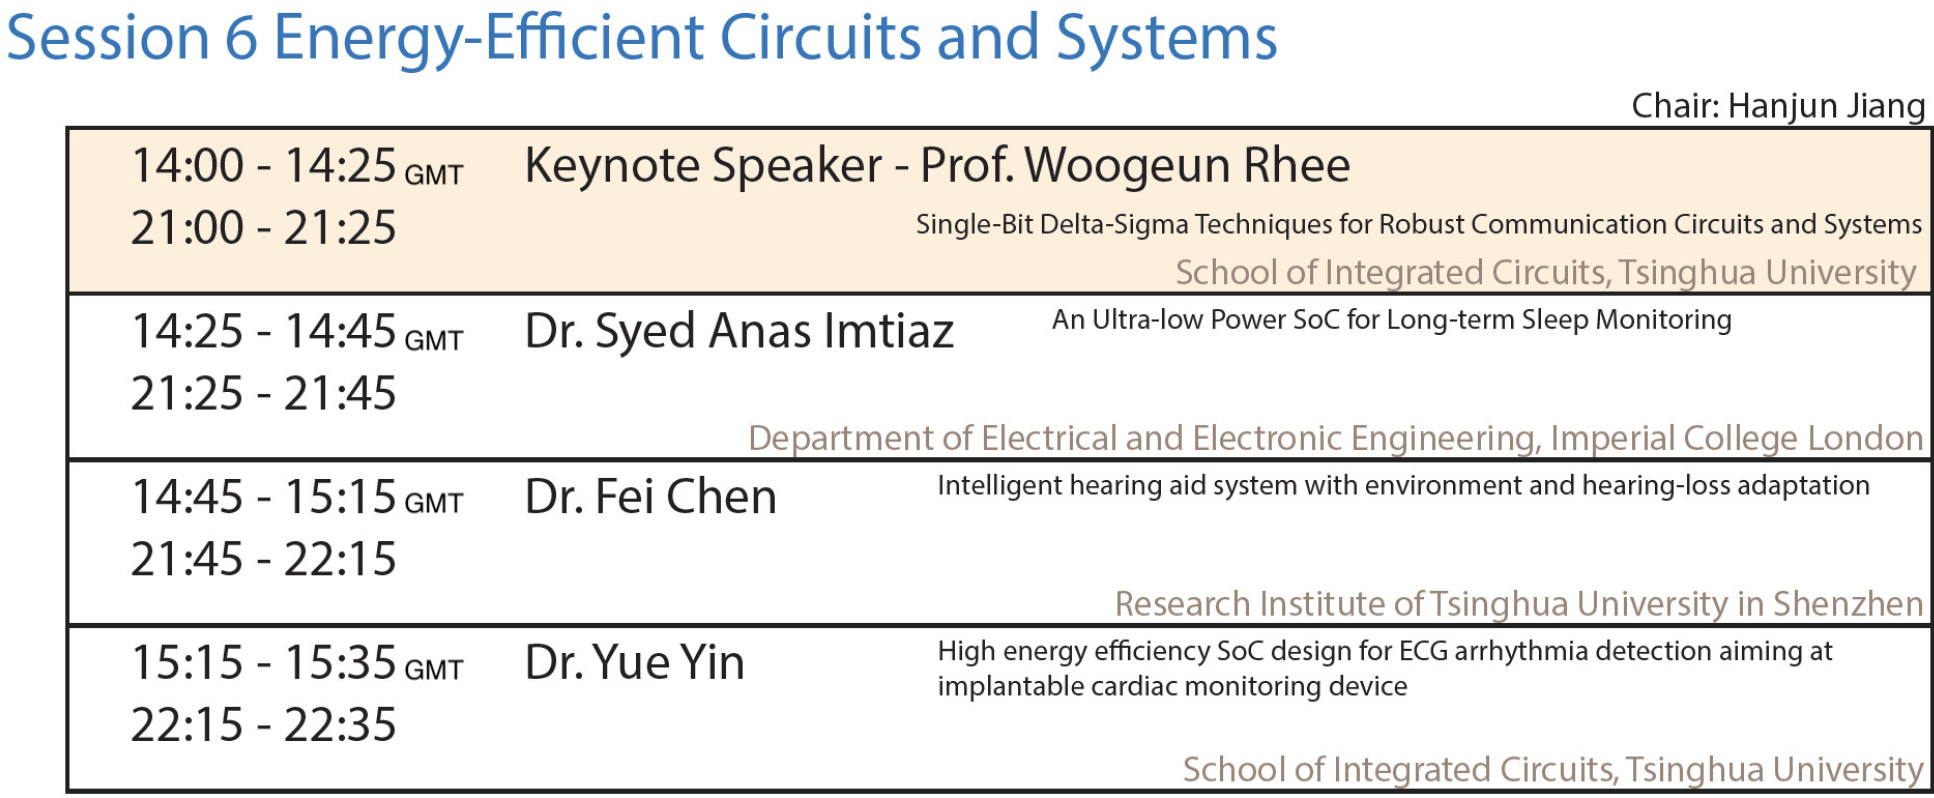 Session 6 Energy-Ecient Circuits and Systems